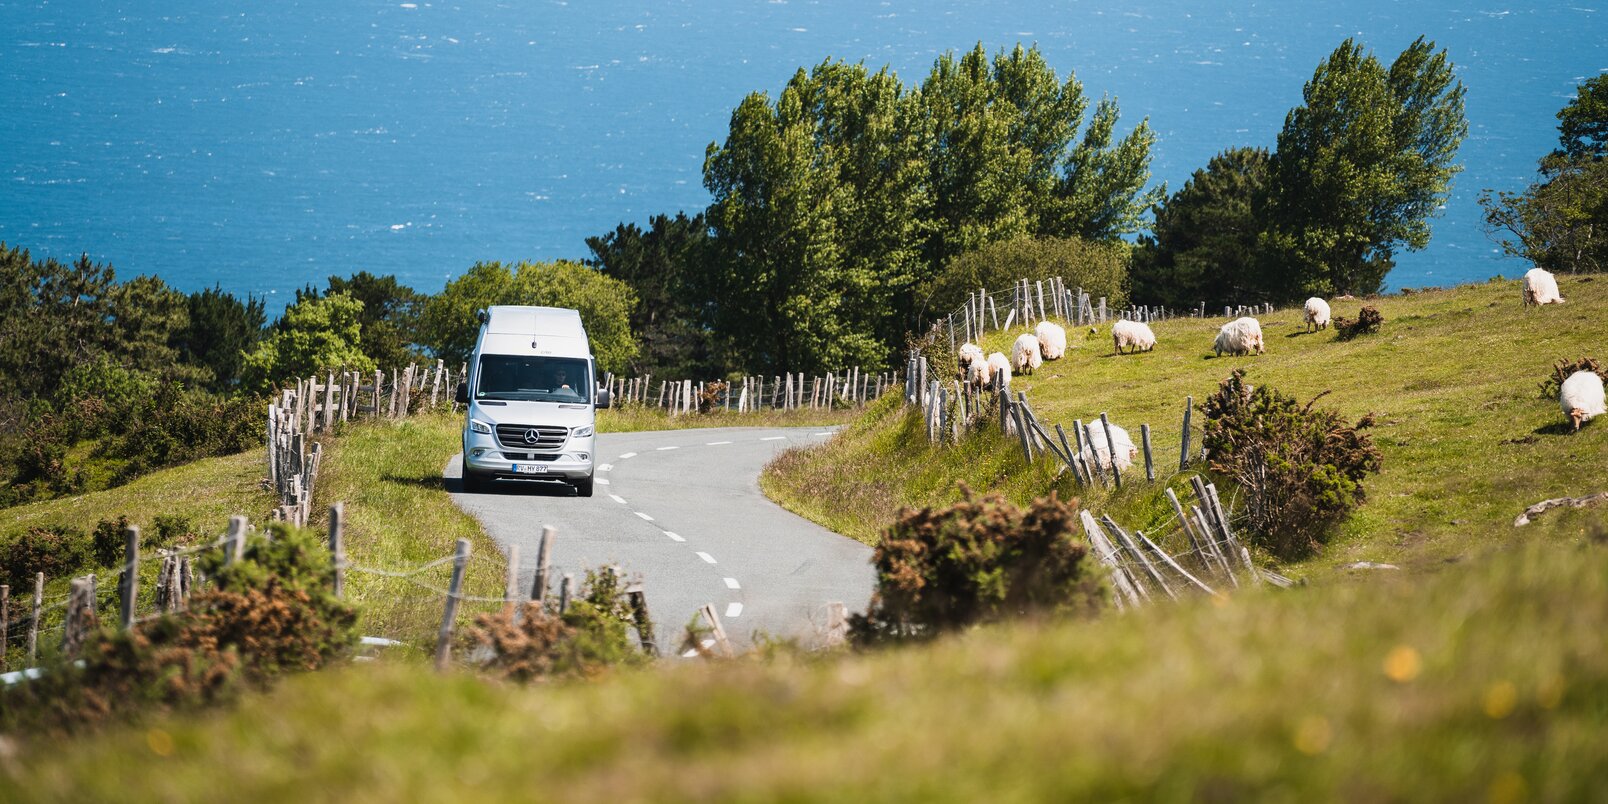 Mercedes Sprinter based HYMER Grand Canyon S on the road next to fenced pasture meadows with sheep, trees and a lake